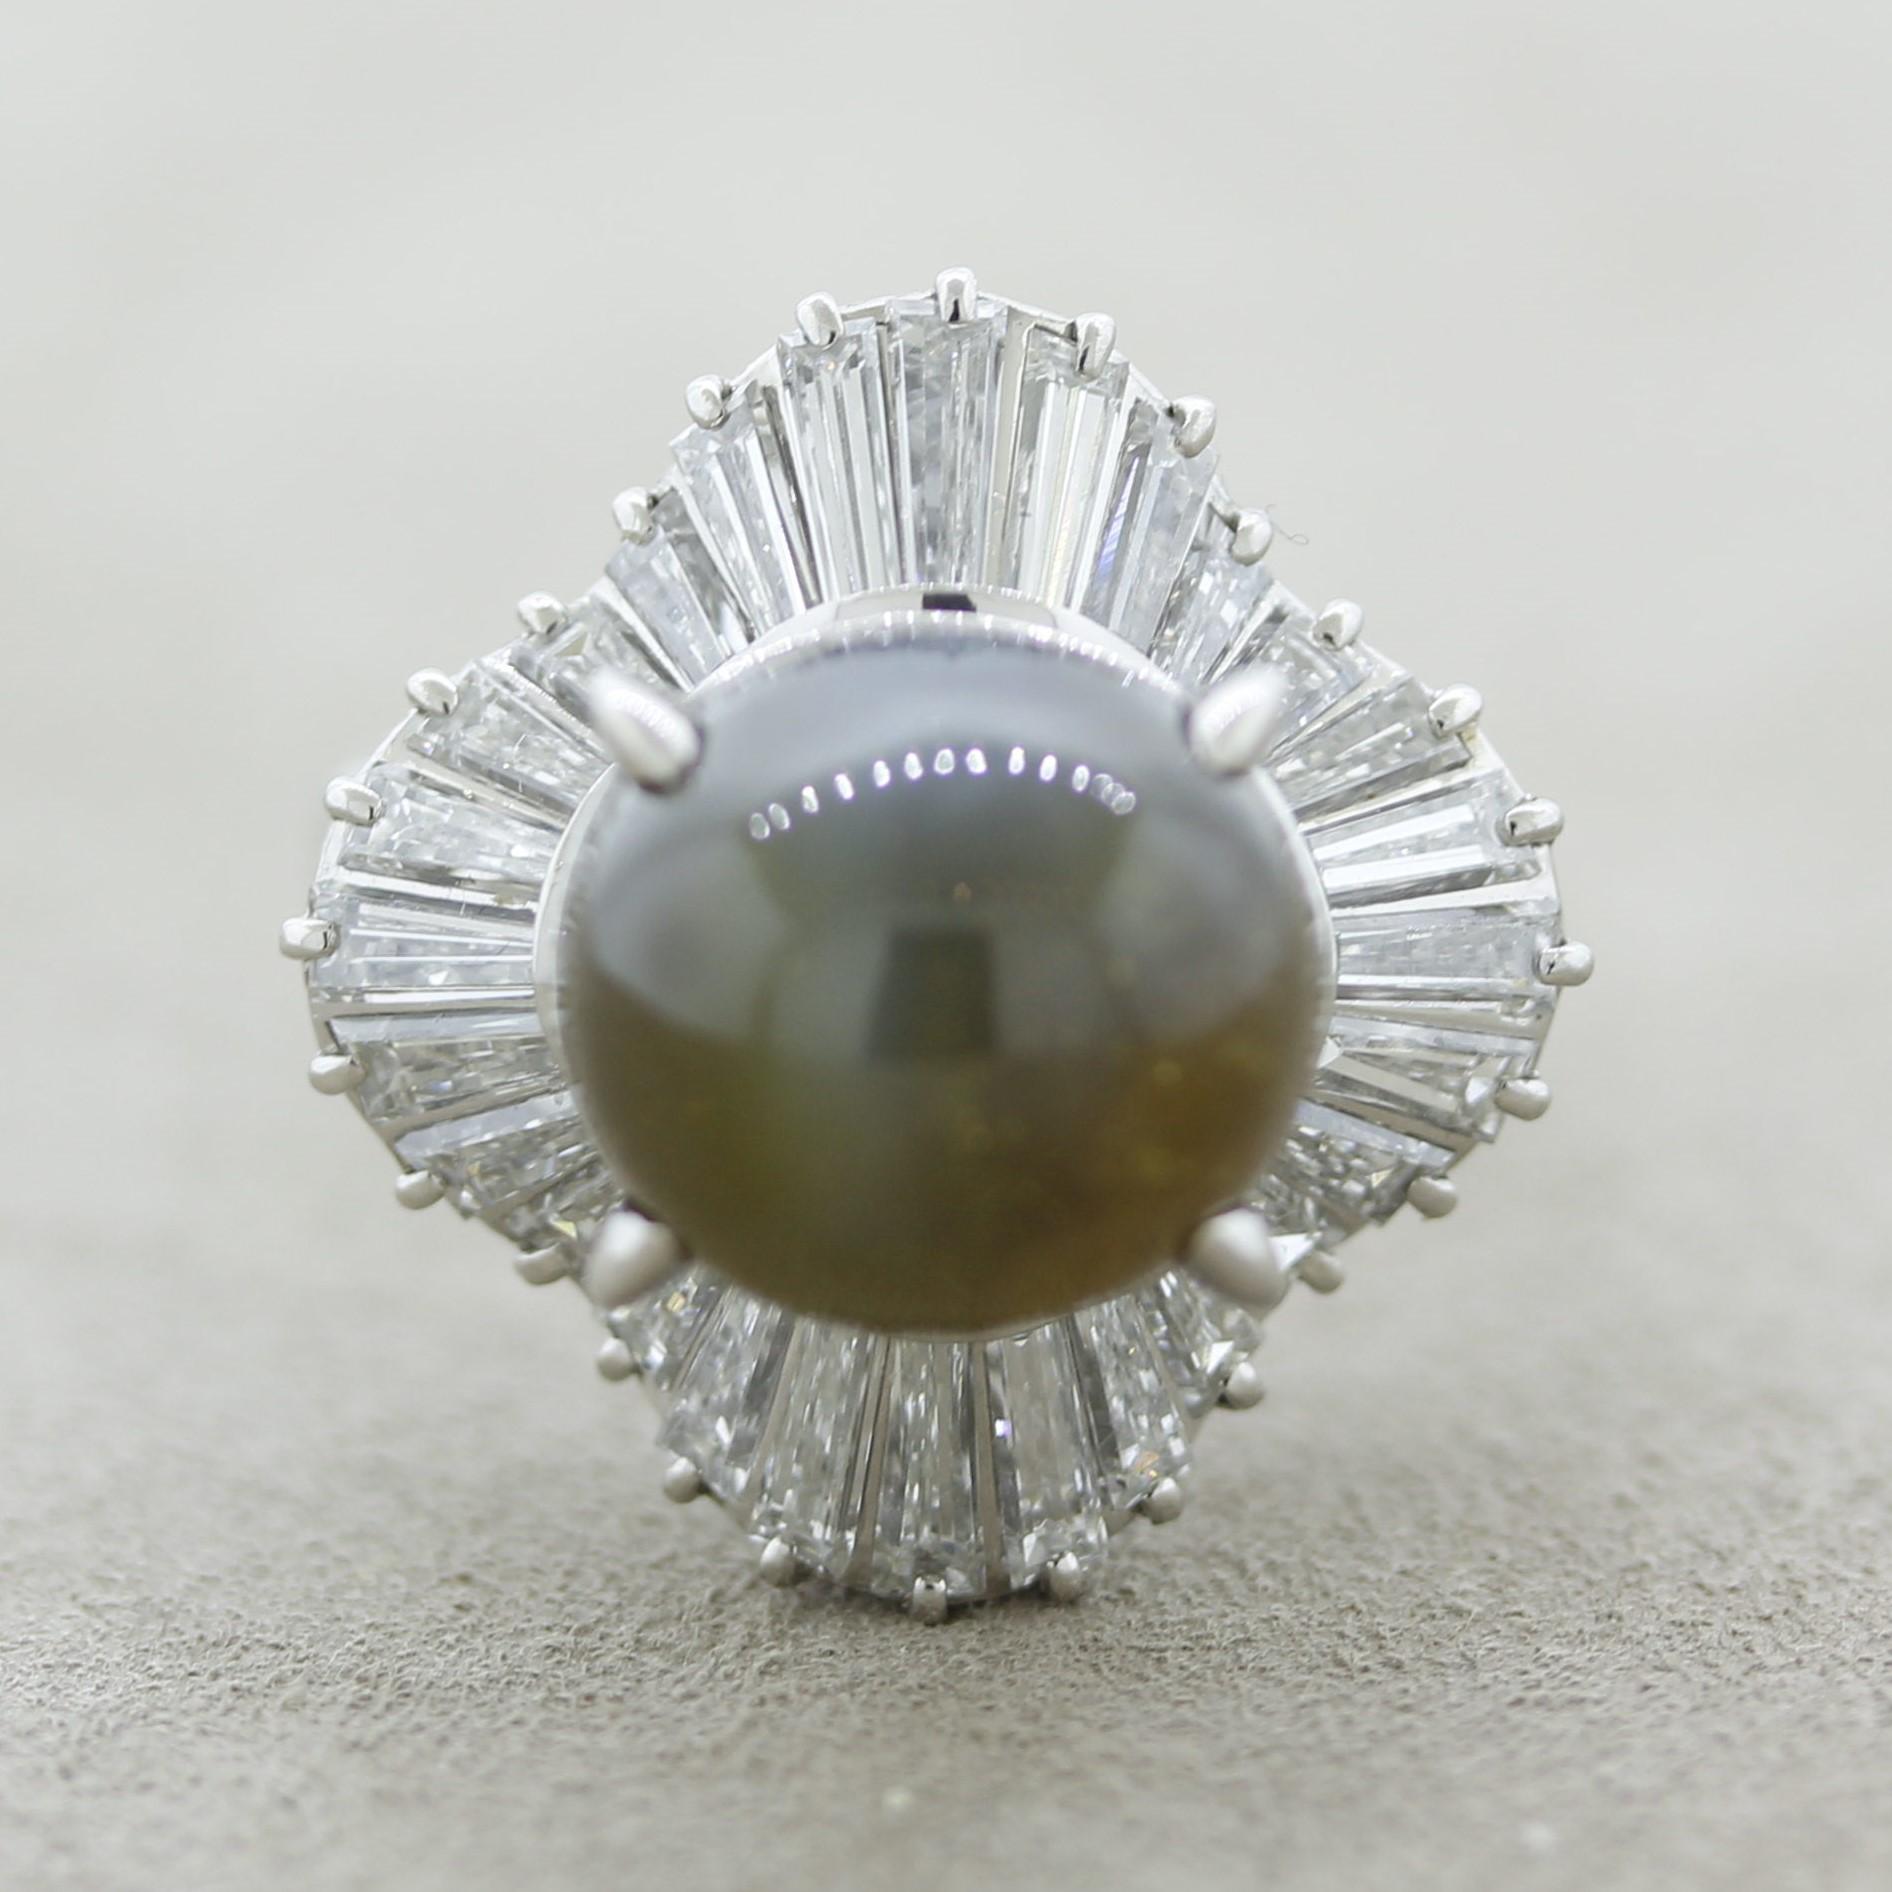 A large and impressive cats eye chrysoberyl takes center stage. It weighs 12.29 carats and has a strong cats eye (known as chatoyancy) when a light hits the stone or when it's outside in direct sunlight. It is complemented by 2.34 carats of